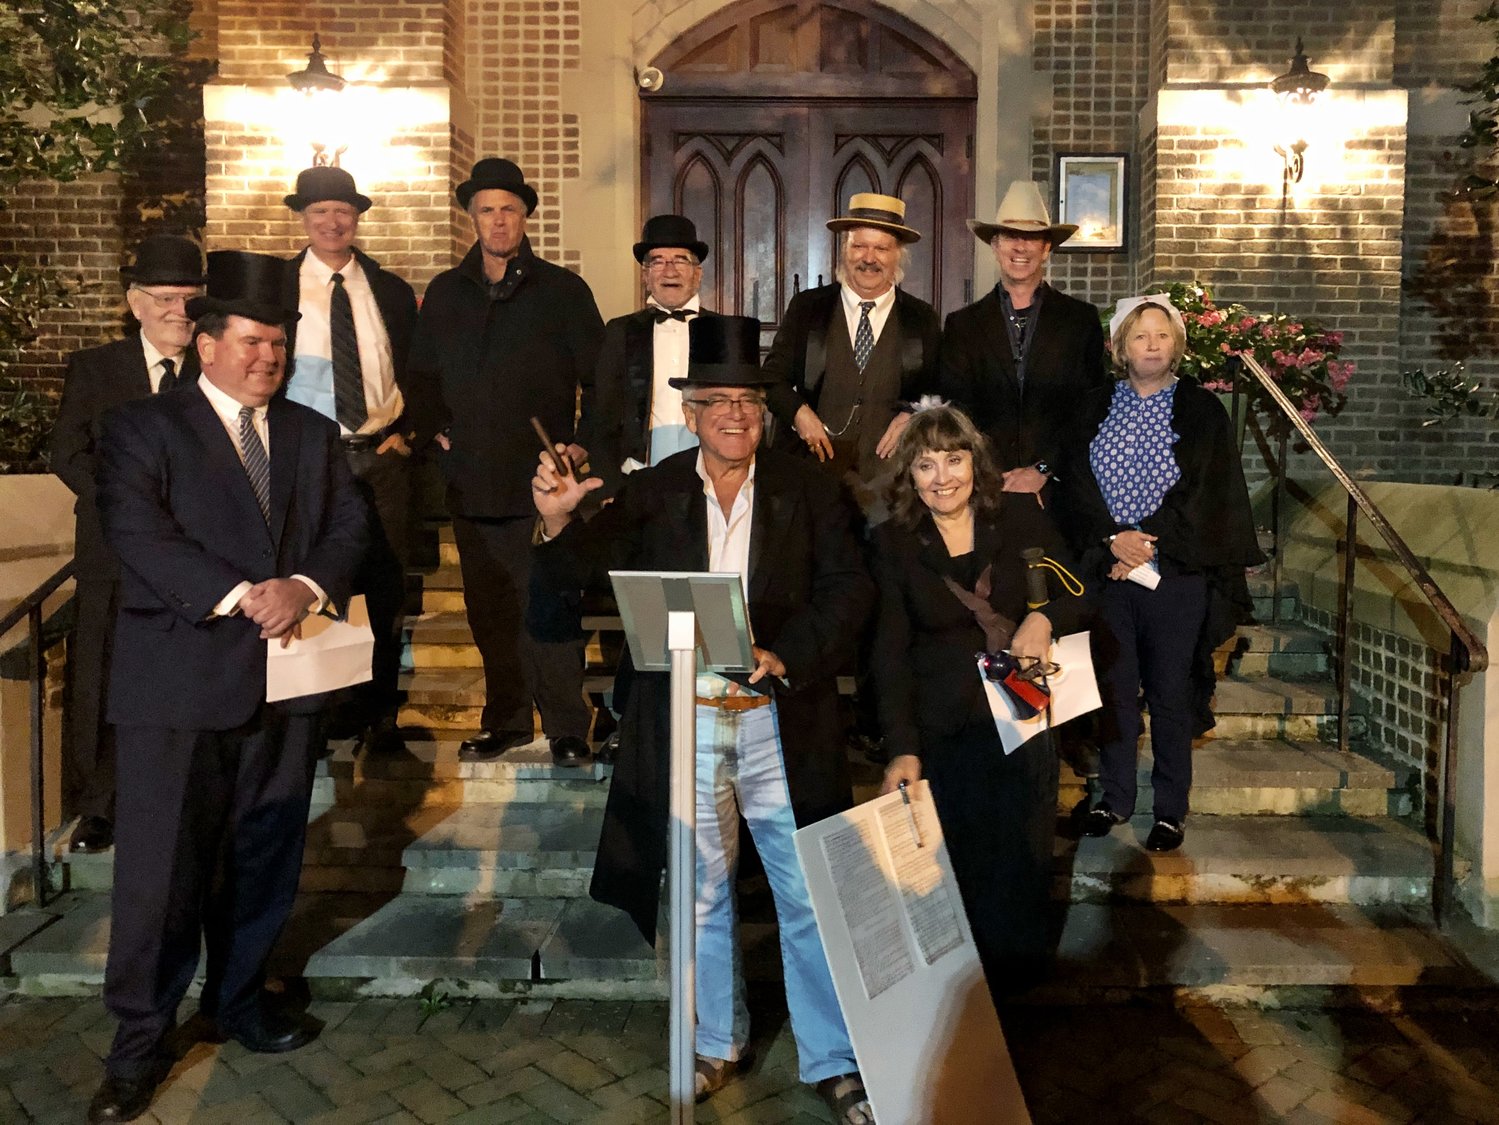 Sea Cliff’s leaders re-enacted the 1883 incorporation of the village. It is the oldest incorporated village in the Town of Oyster Bay.